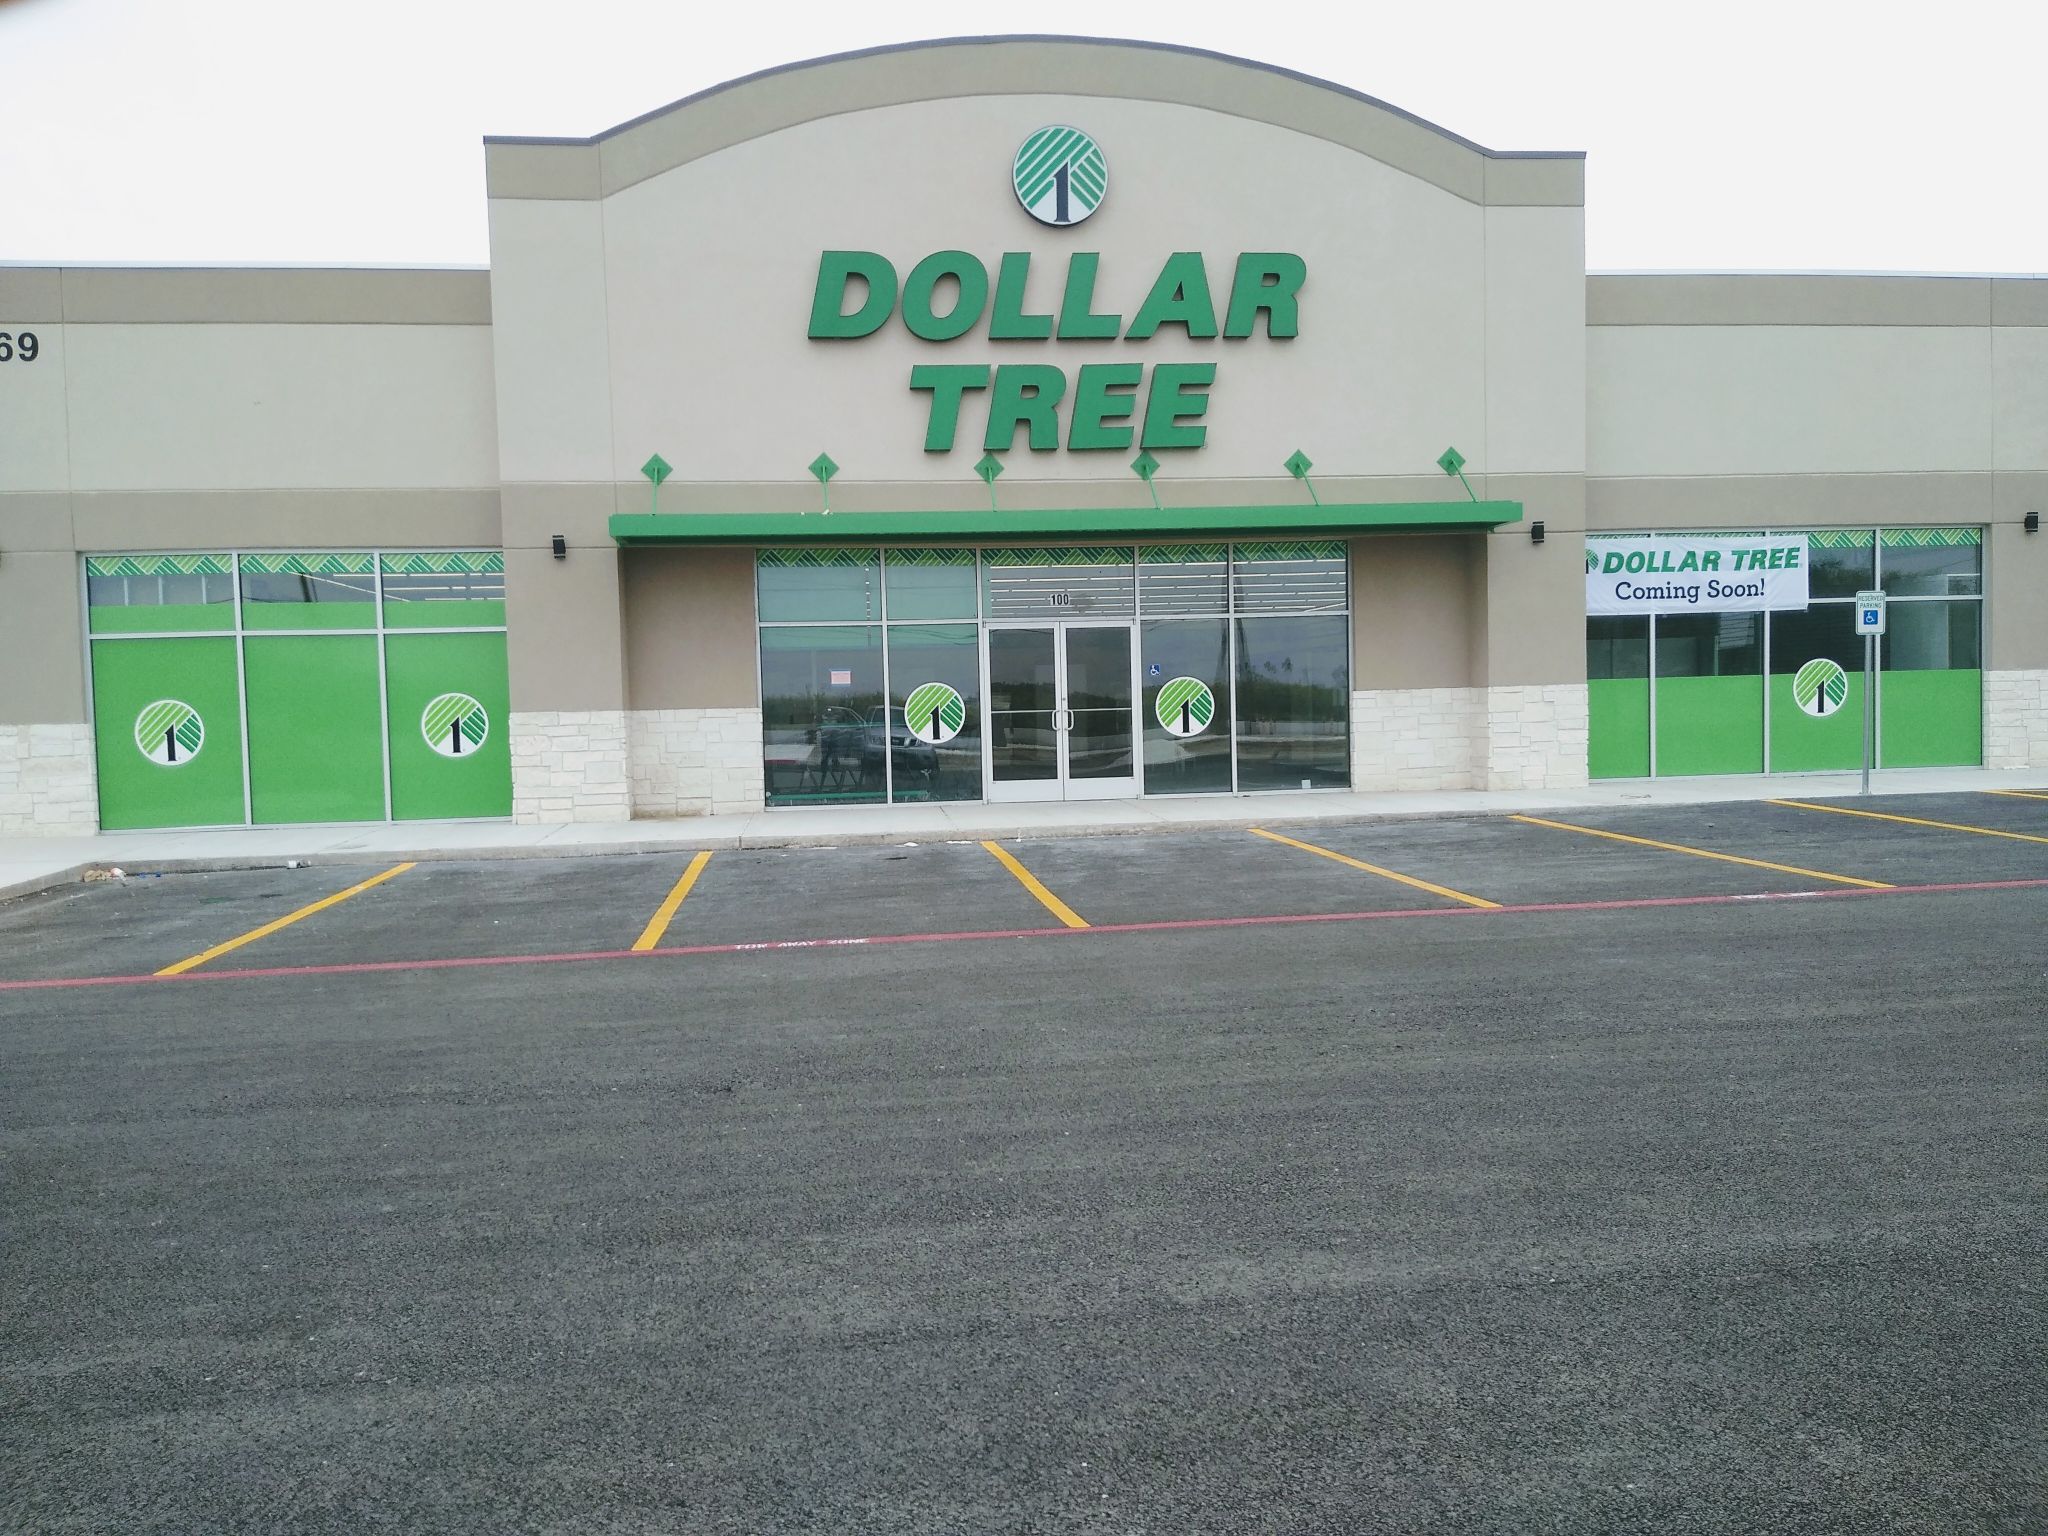 Delivered a prominent storefront signage for Dollar Tree, marking its presence with clear, brand-aligned aesthetics.